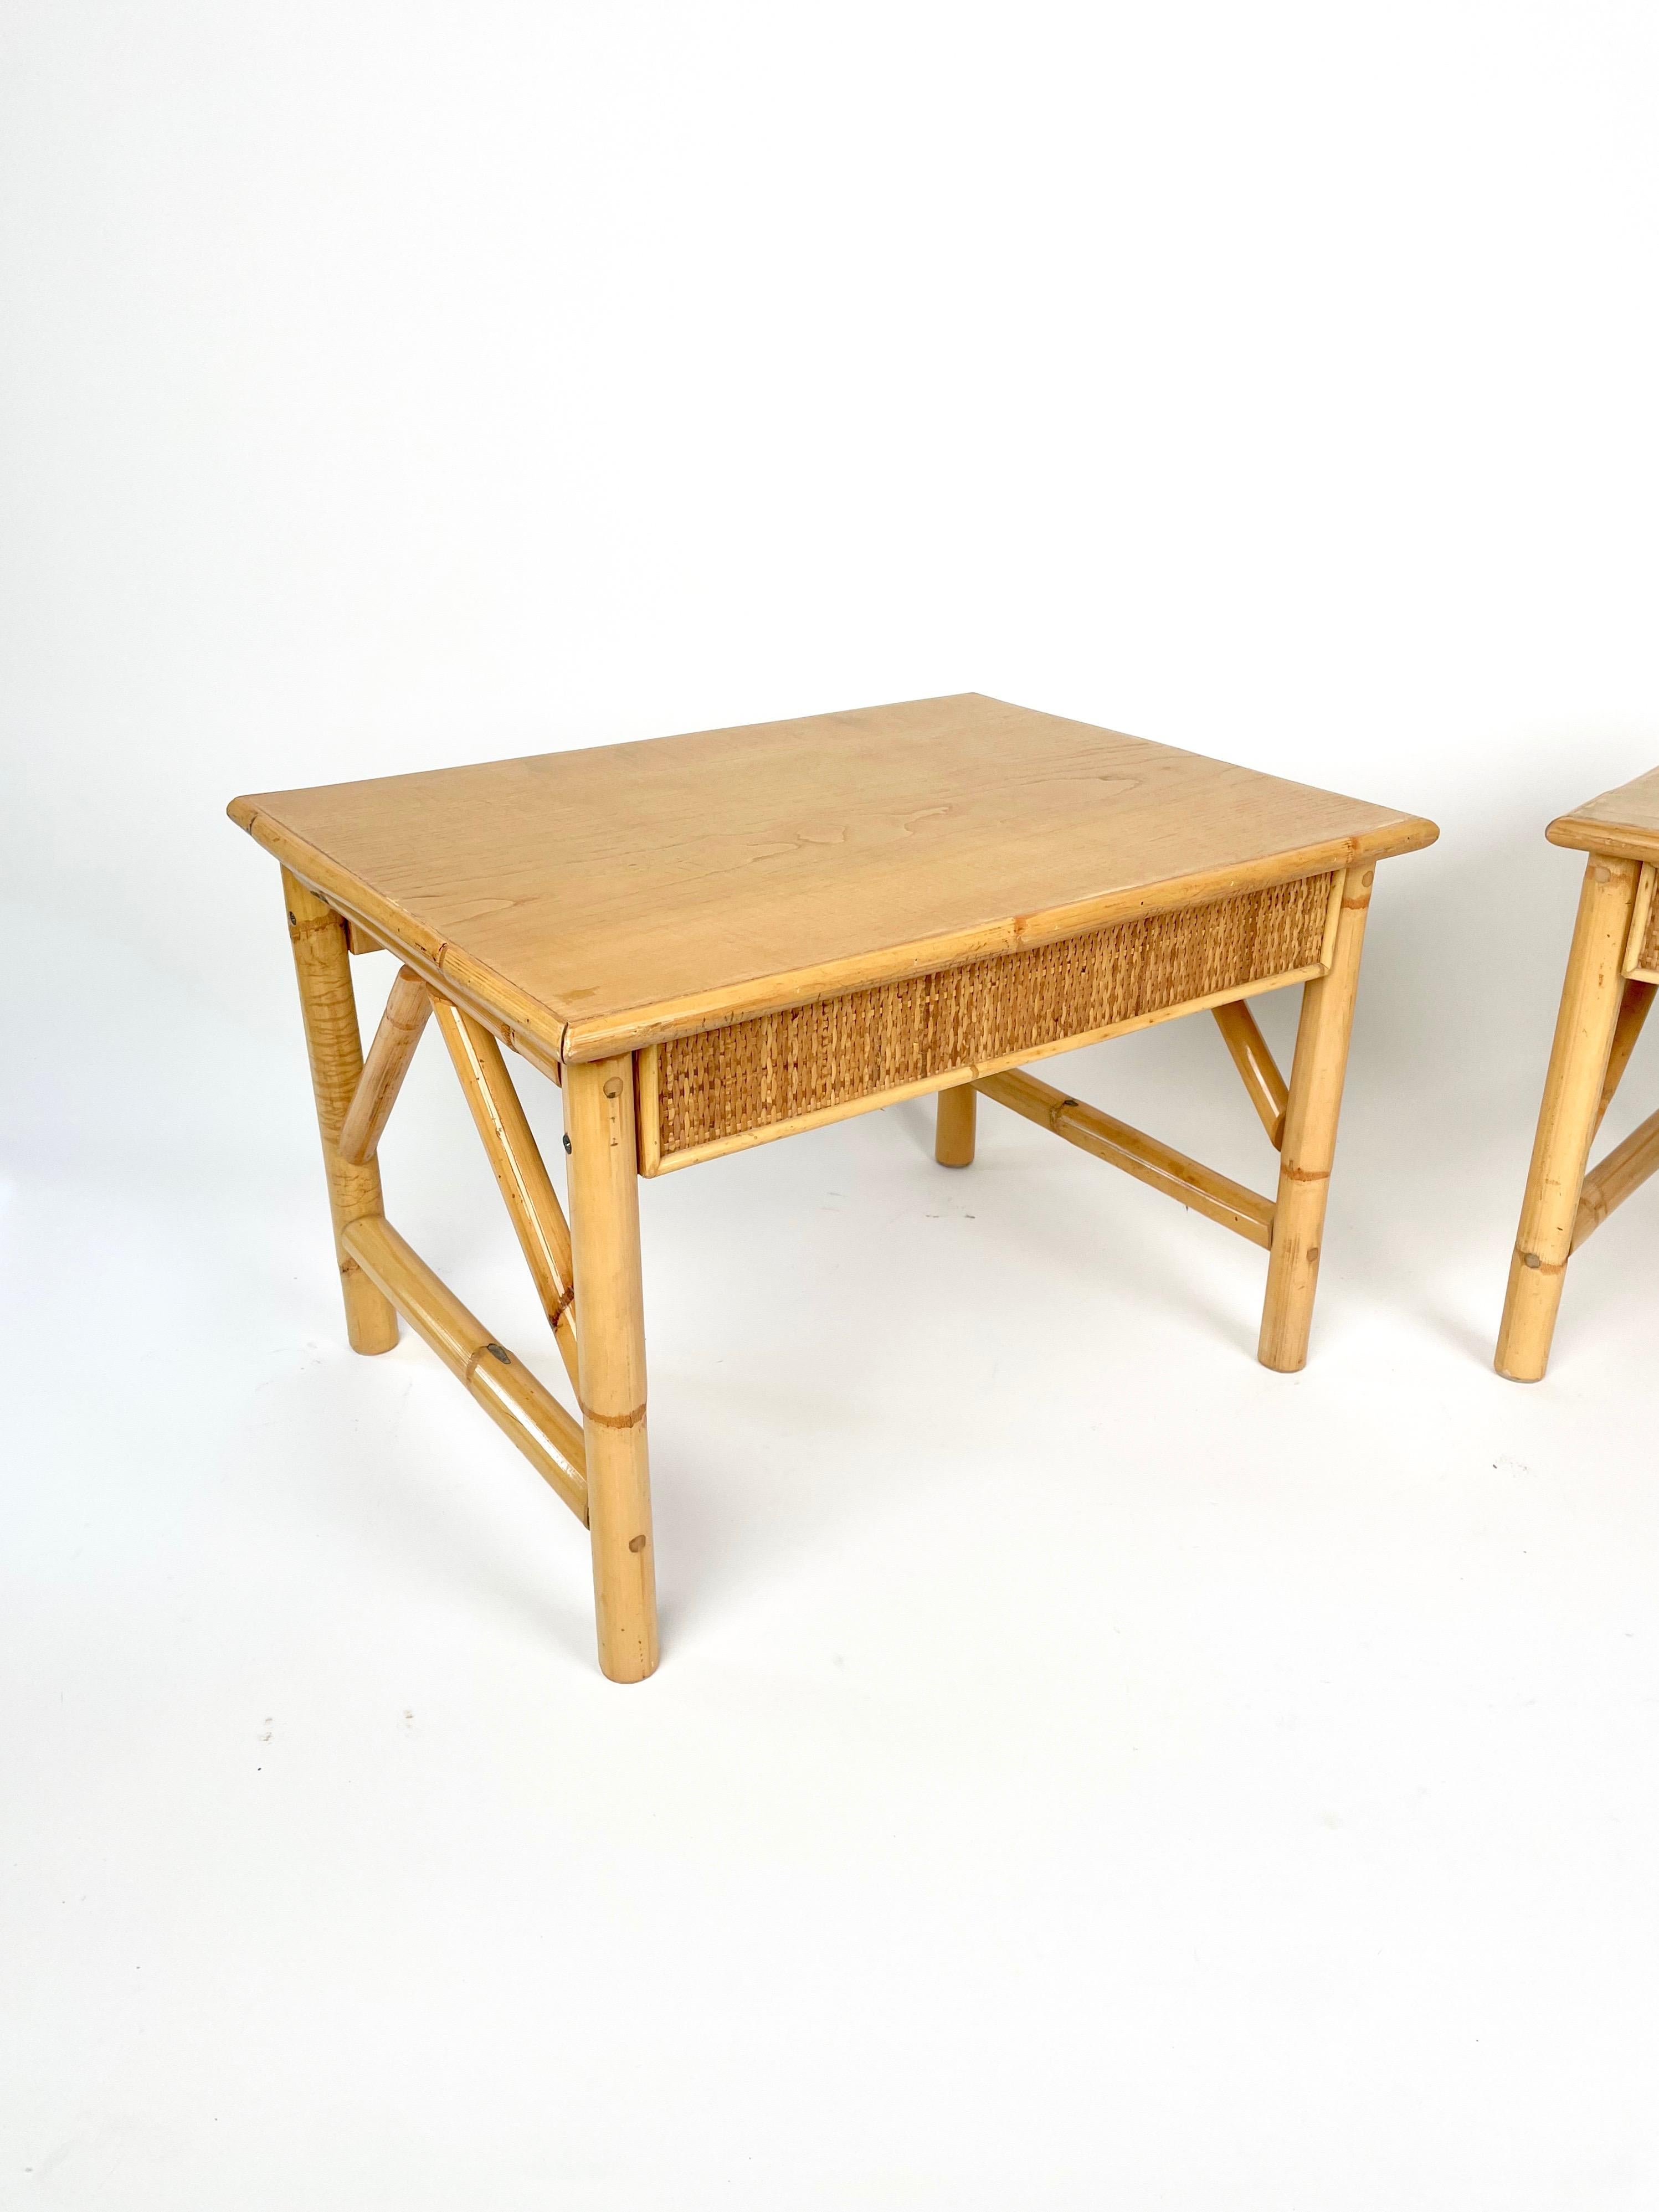 Bamboo, Rattan and Wood Pair of Side Coffee Tables, Italy 1980s For Sale 2